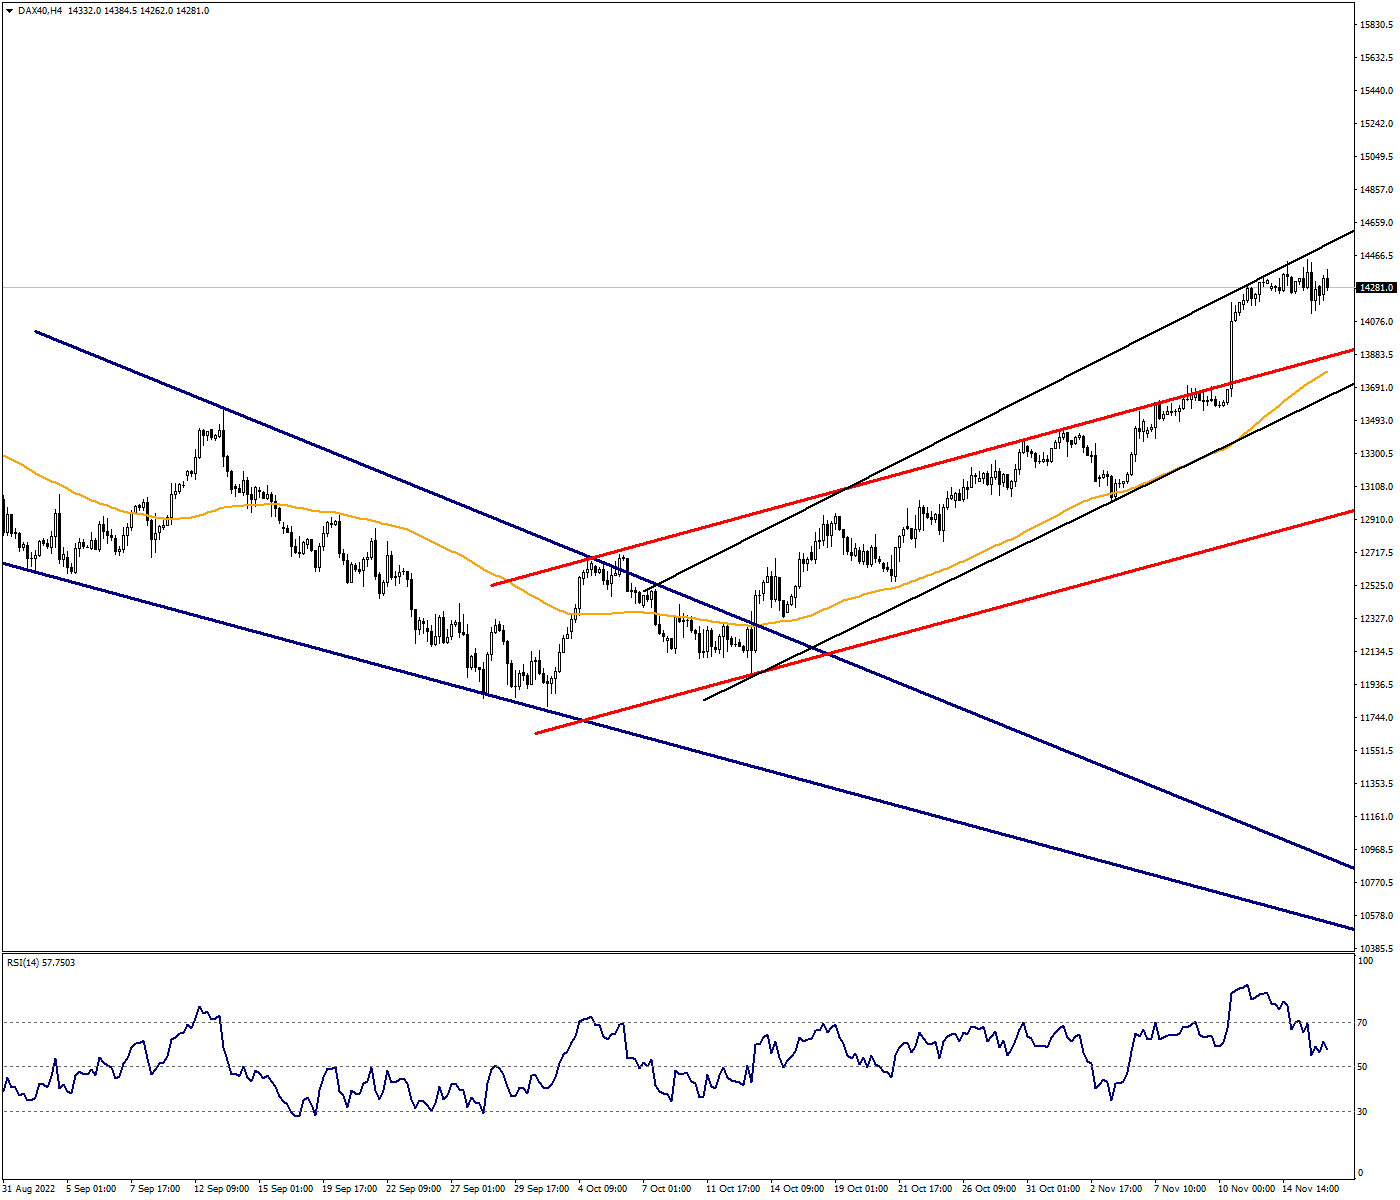 DAX40 Continues to Defend Recovery Channel